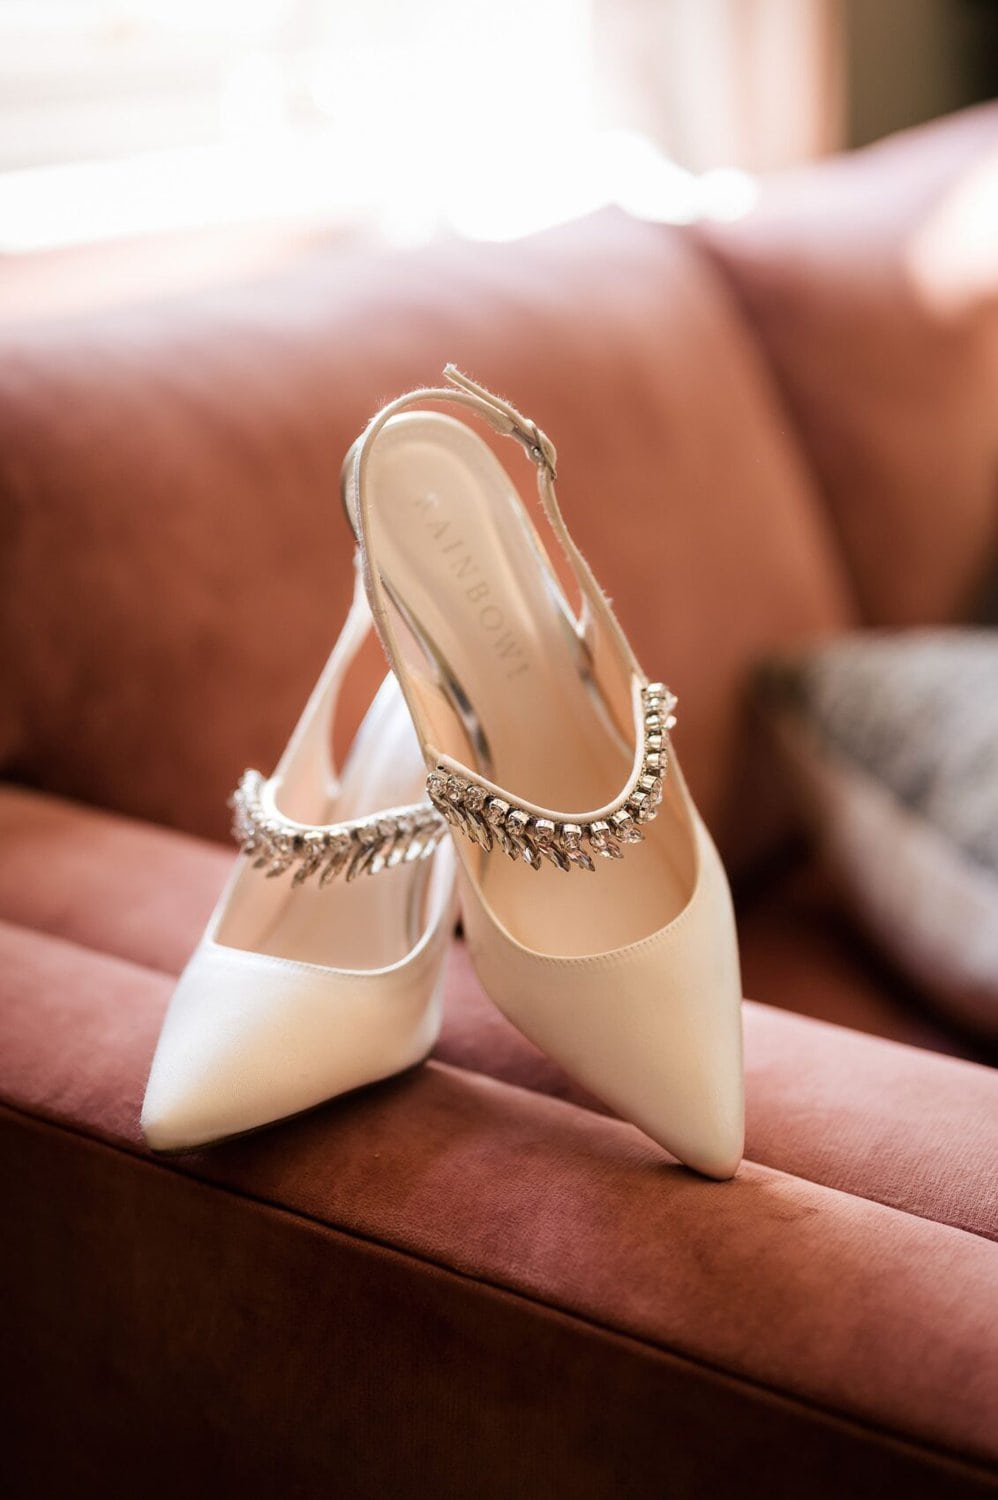 Brides shoes on the sofa